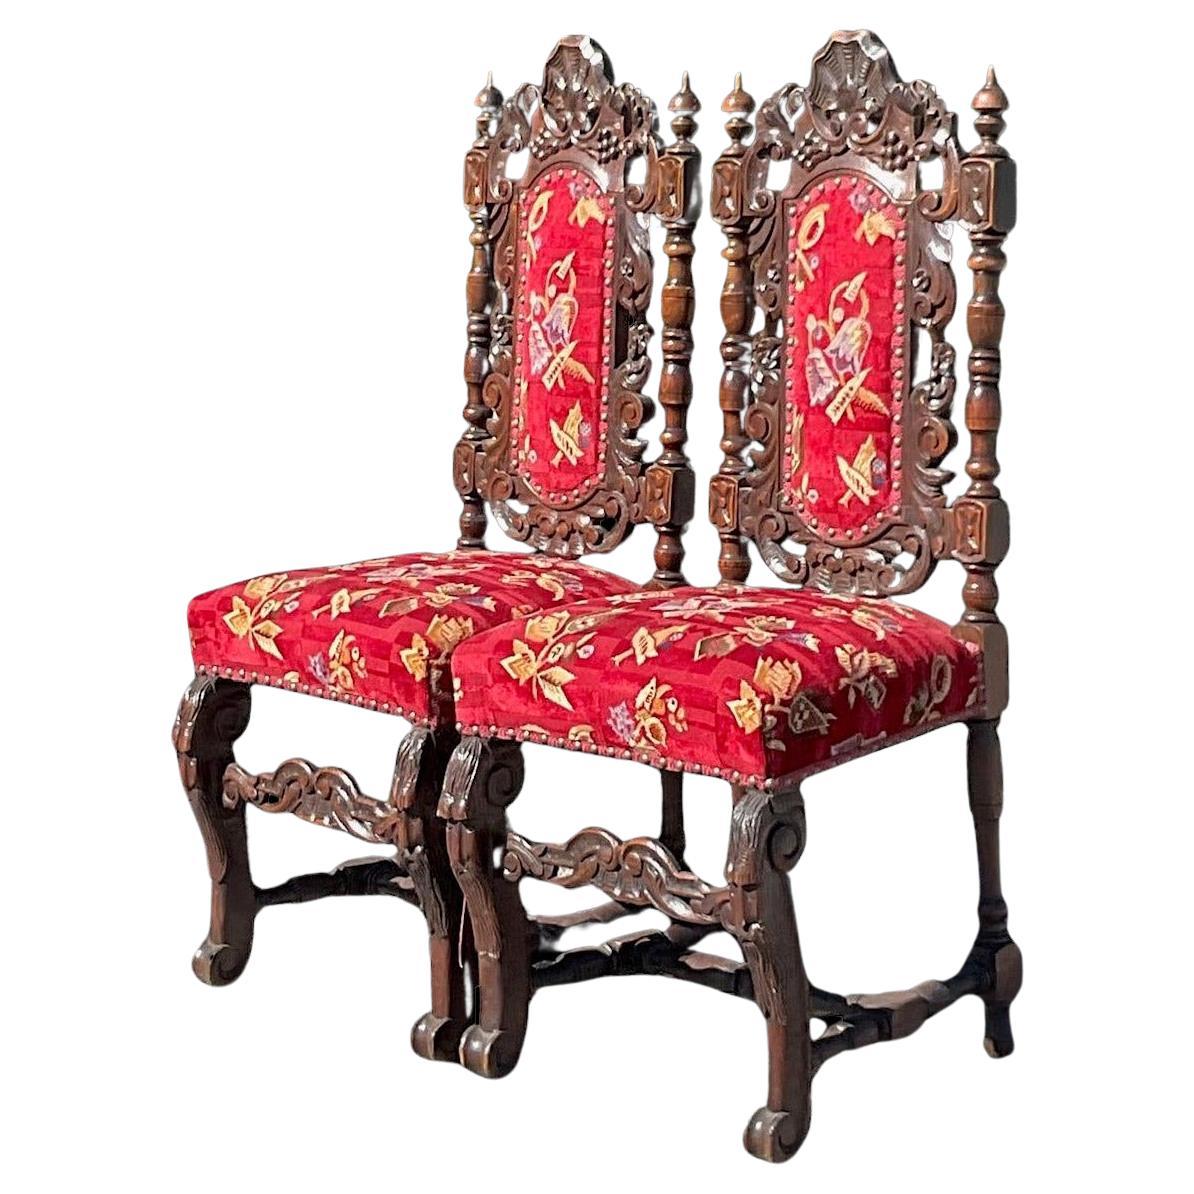 Vintage Gothic Carved Wood Dining Chairs - a Pair